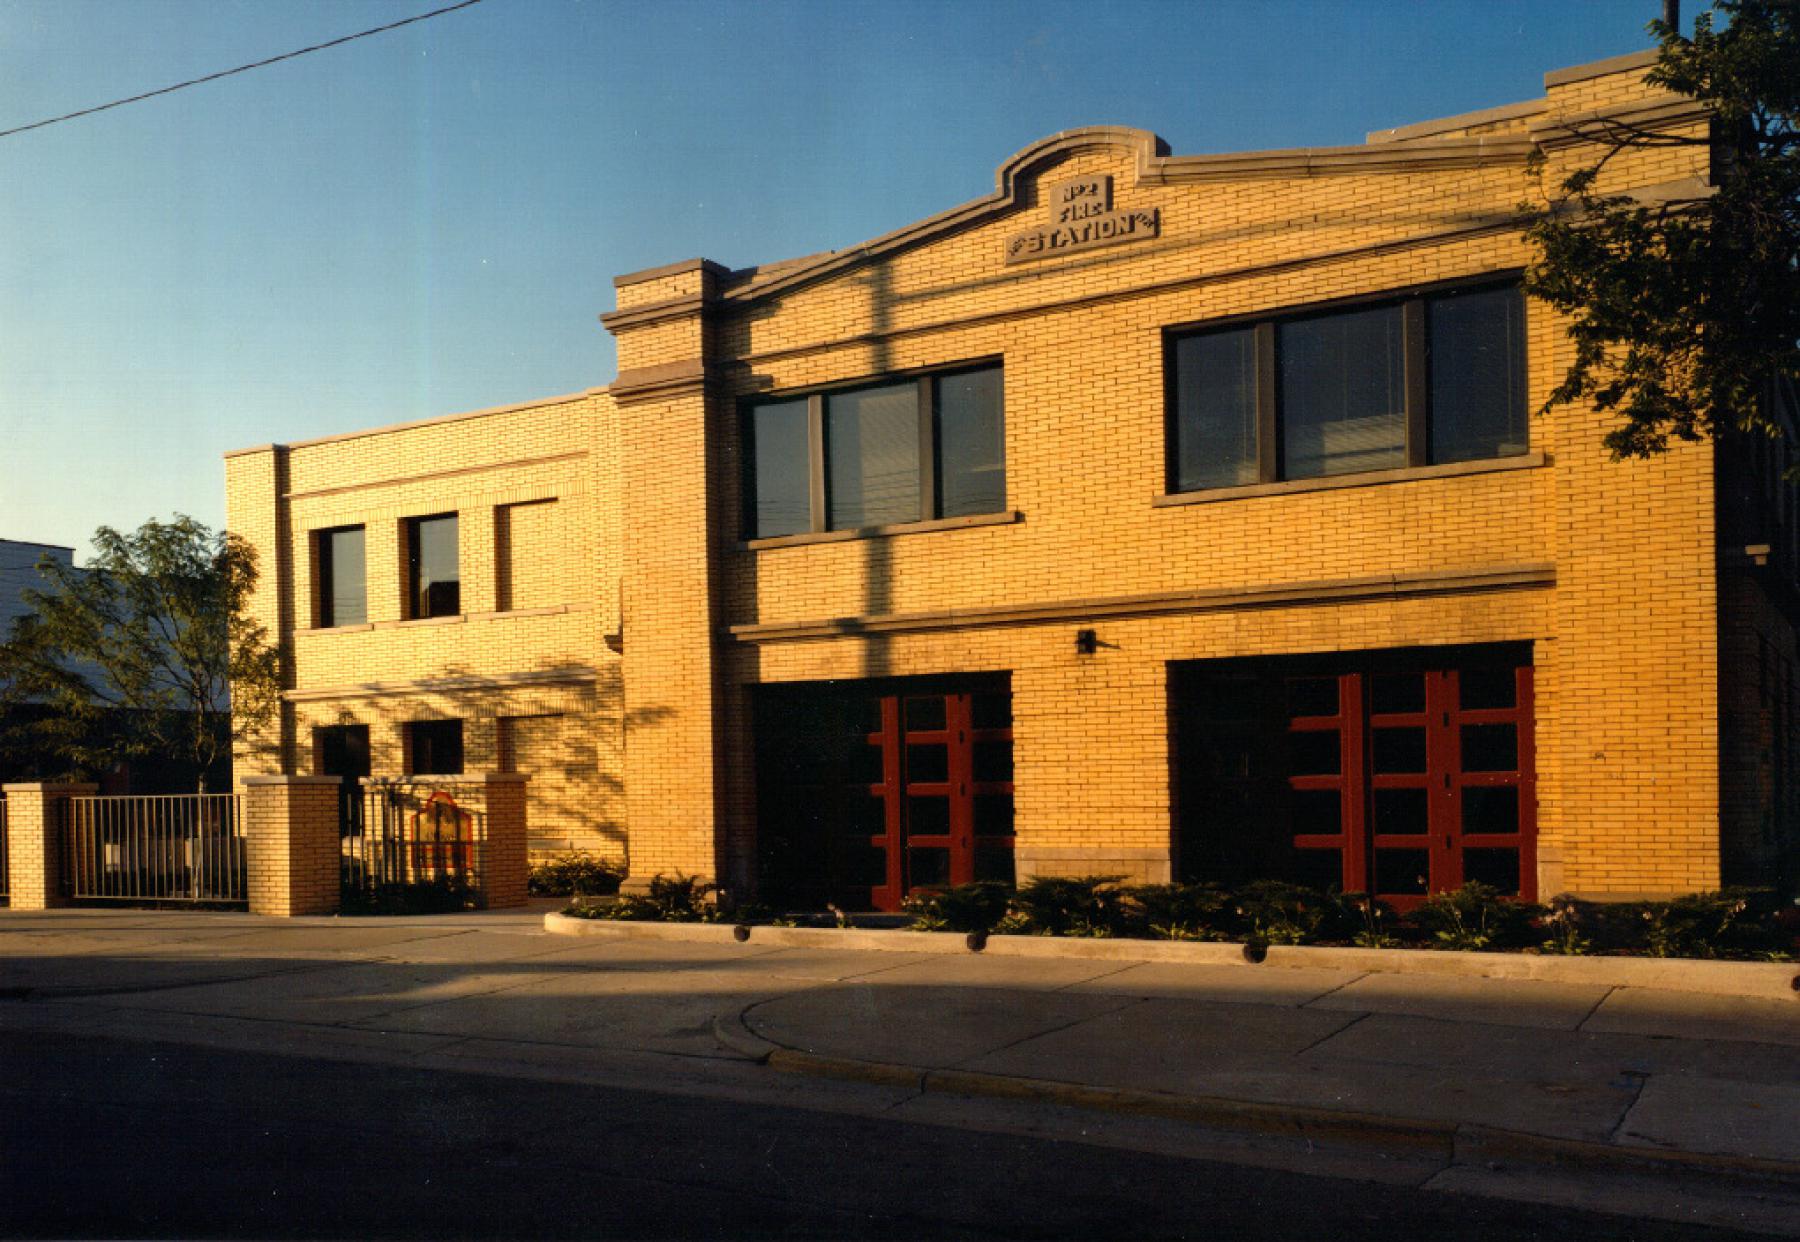 ULI Fire Station Number 2, Downtown Madison